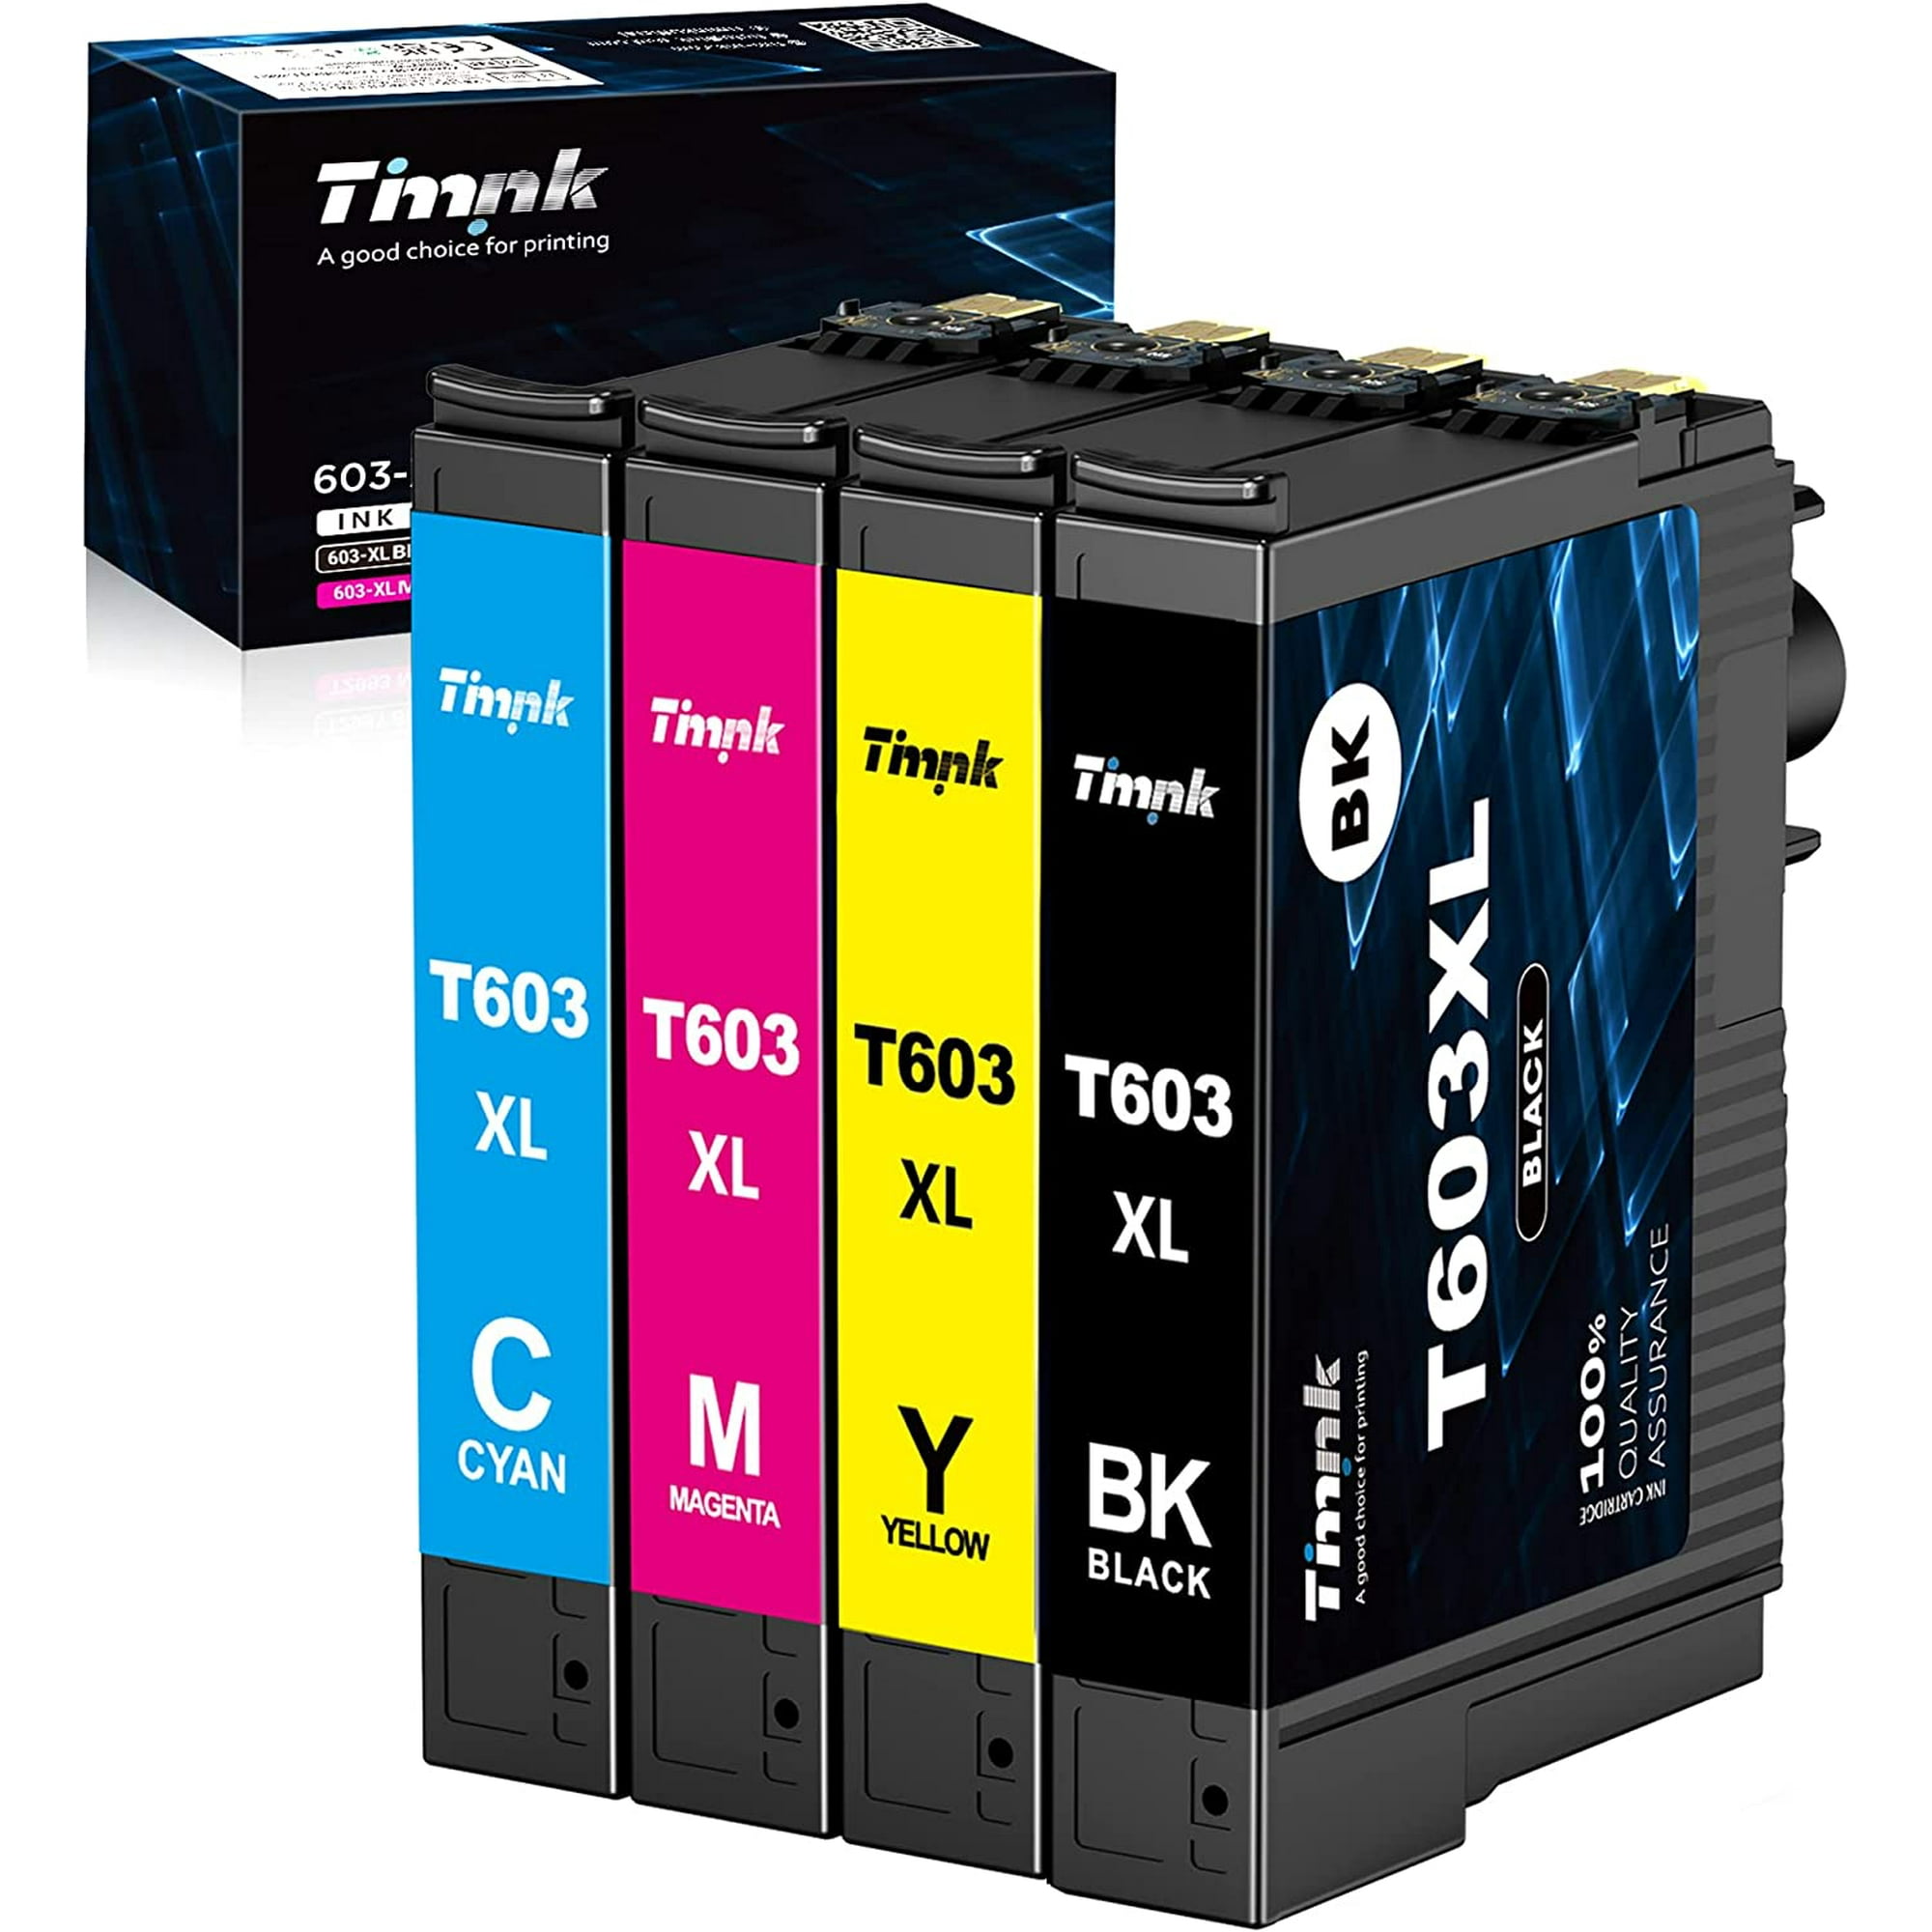 603XL Compatible Ink Cartridge Replacement for Epson 603/603 XL